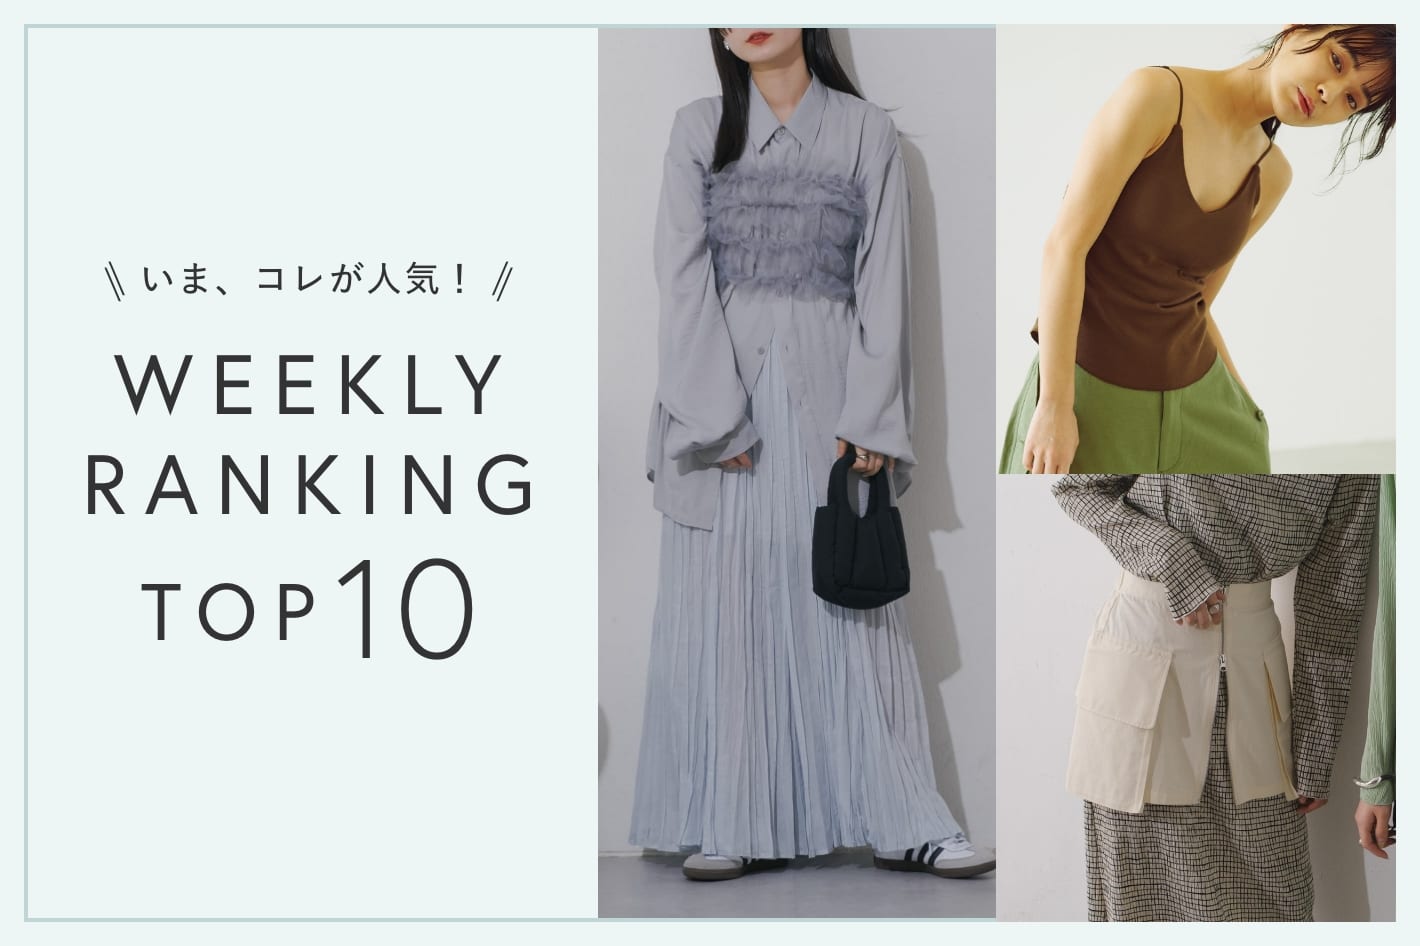 OUTLET いま、これが人気！WEEKLY RANKING TOP10！【5/21更新】